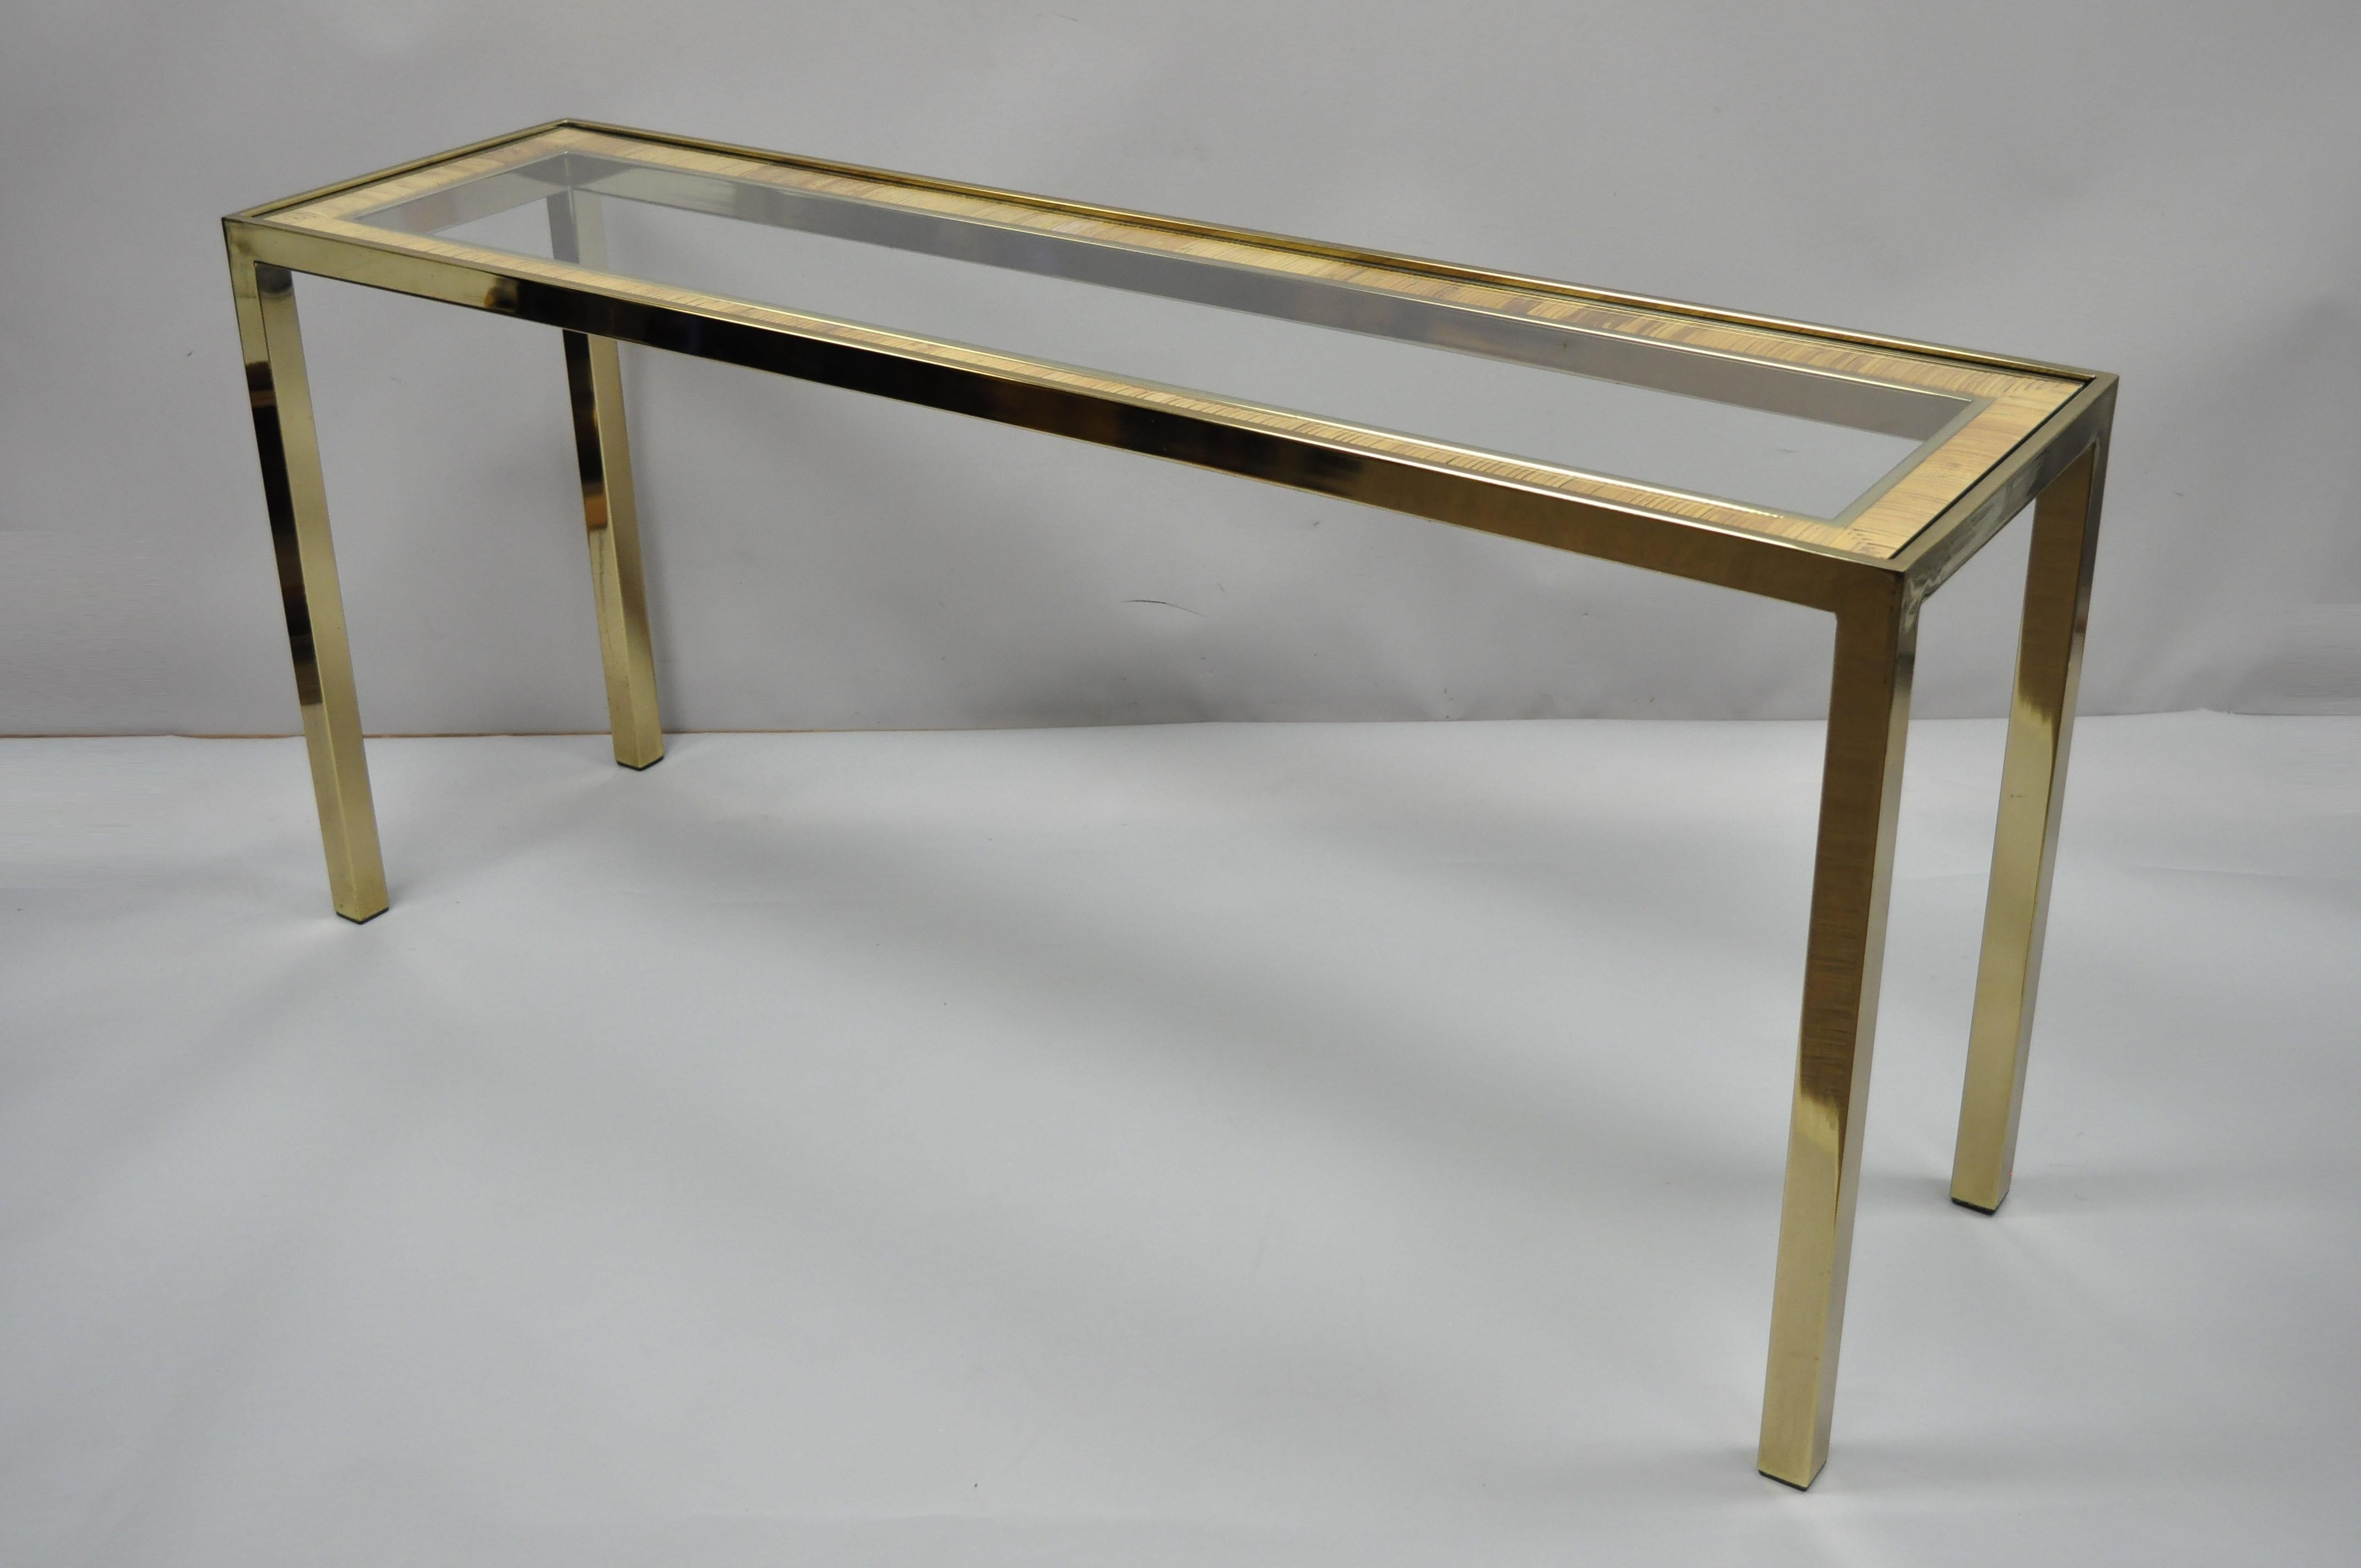 Vintage Mid-Century Modern Italian brass, glass, and rattan console table. Item features brass-plated metal frame, rattan wrapped border, inset glass top, clean modernist lines, great style and form. Similar to the quality and works of Milo Baughman